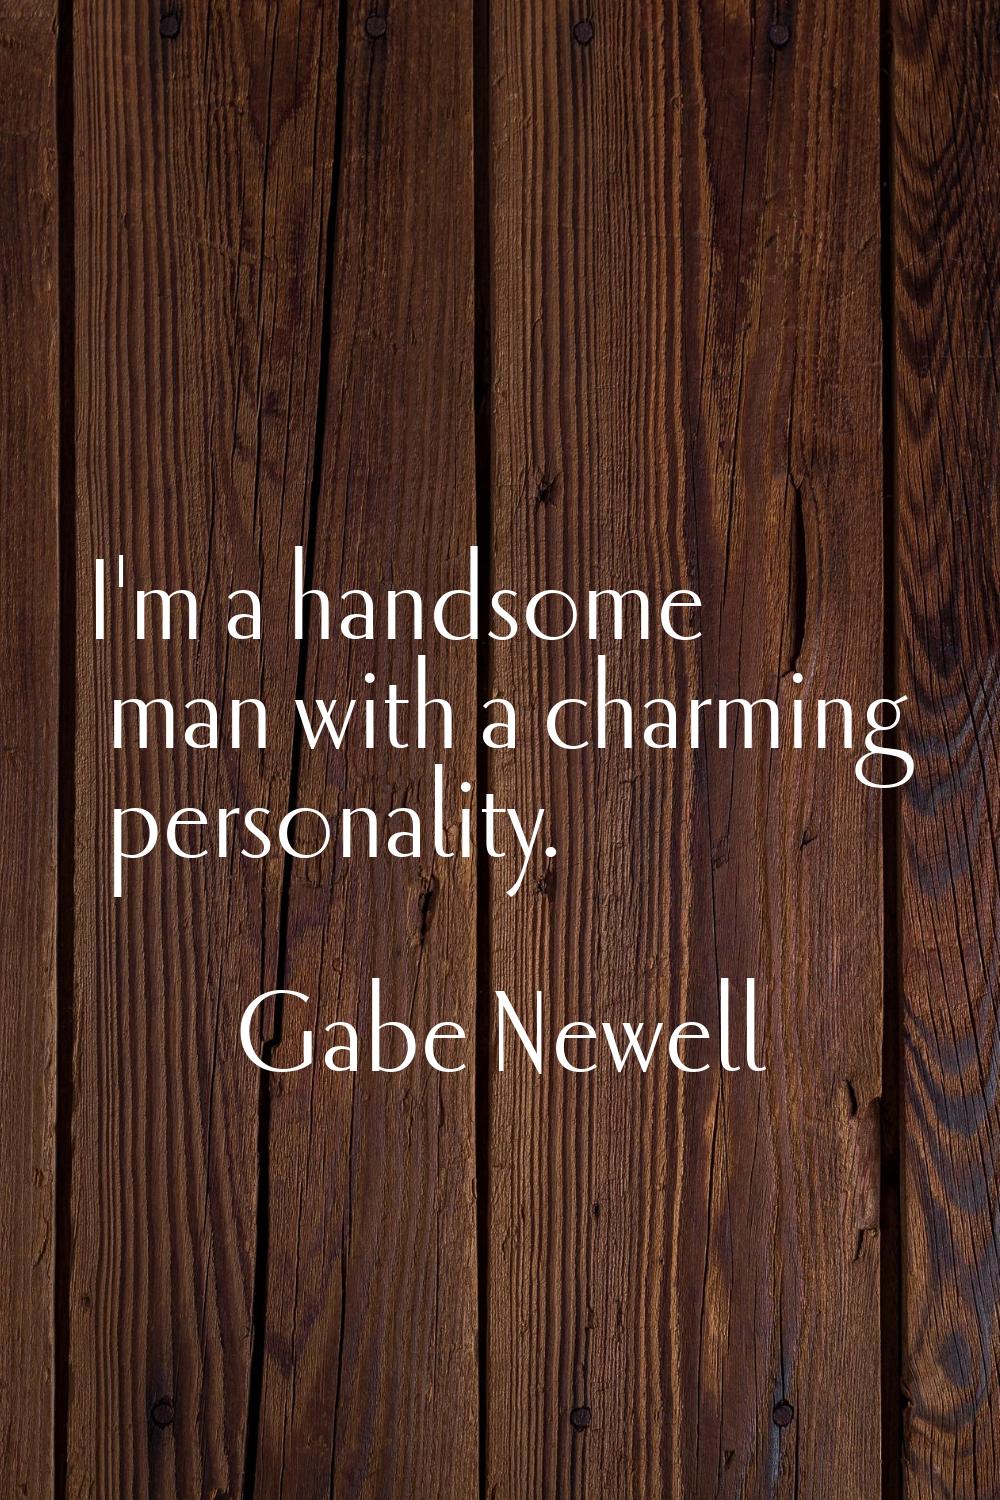 I'm a handsome man with a charming personality.